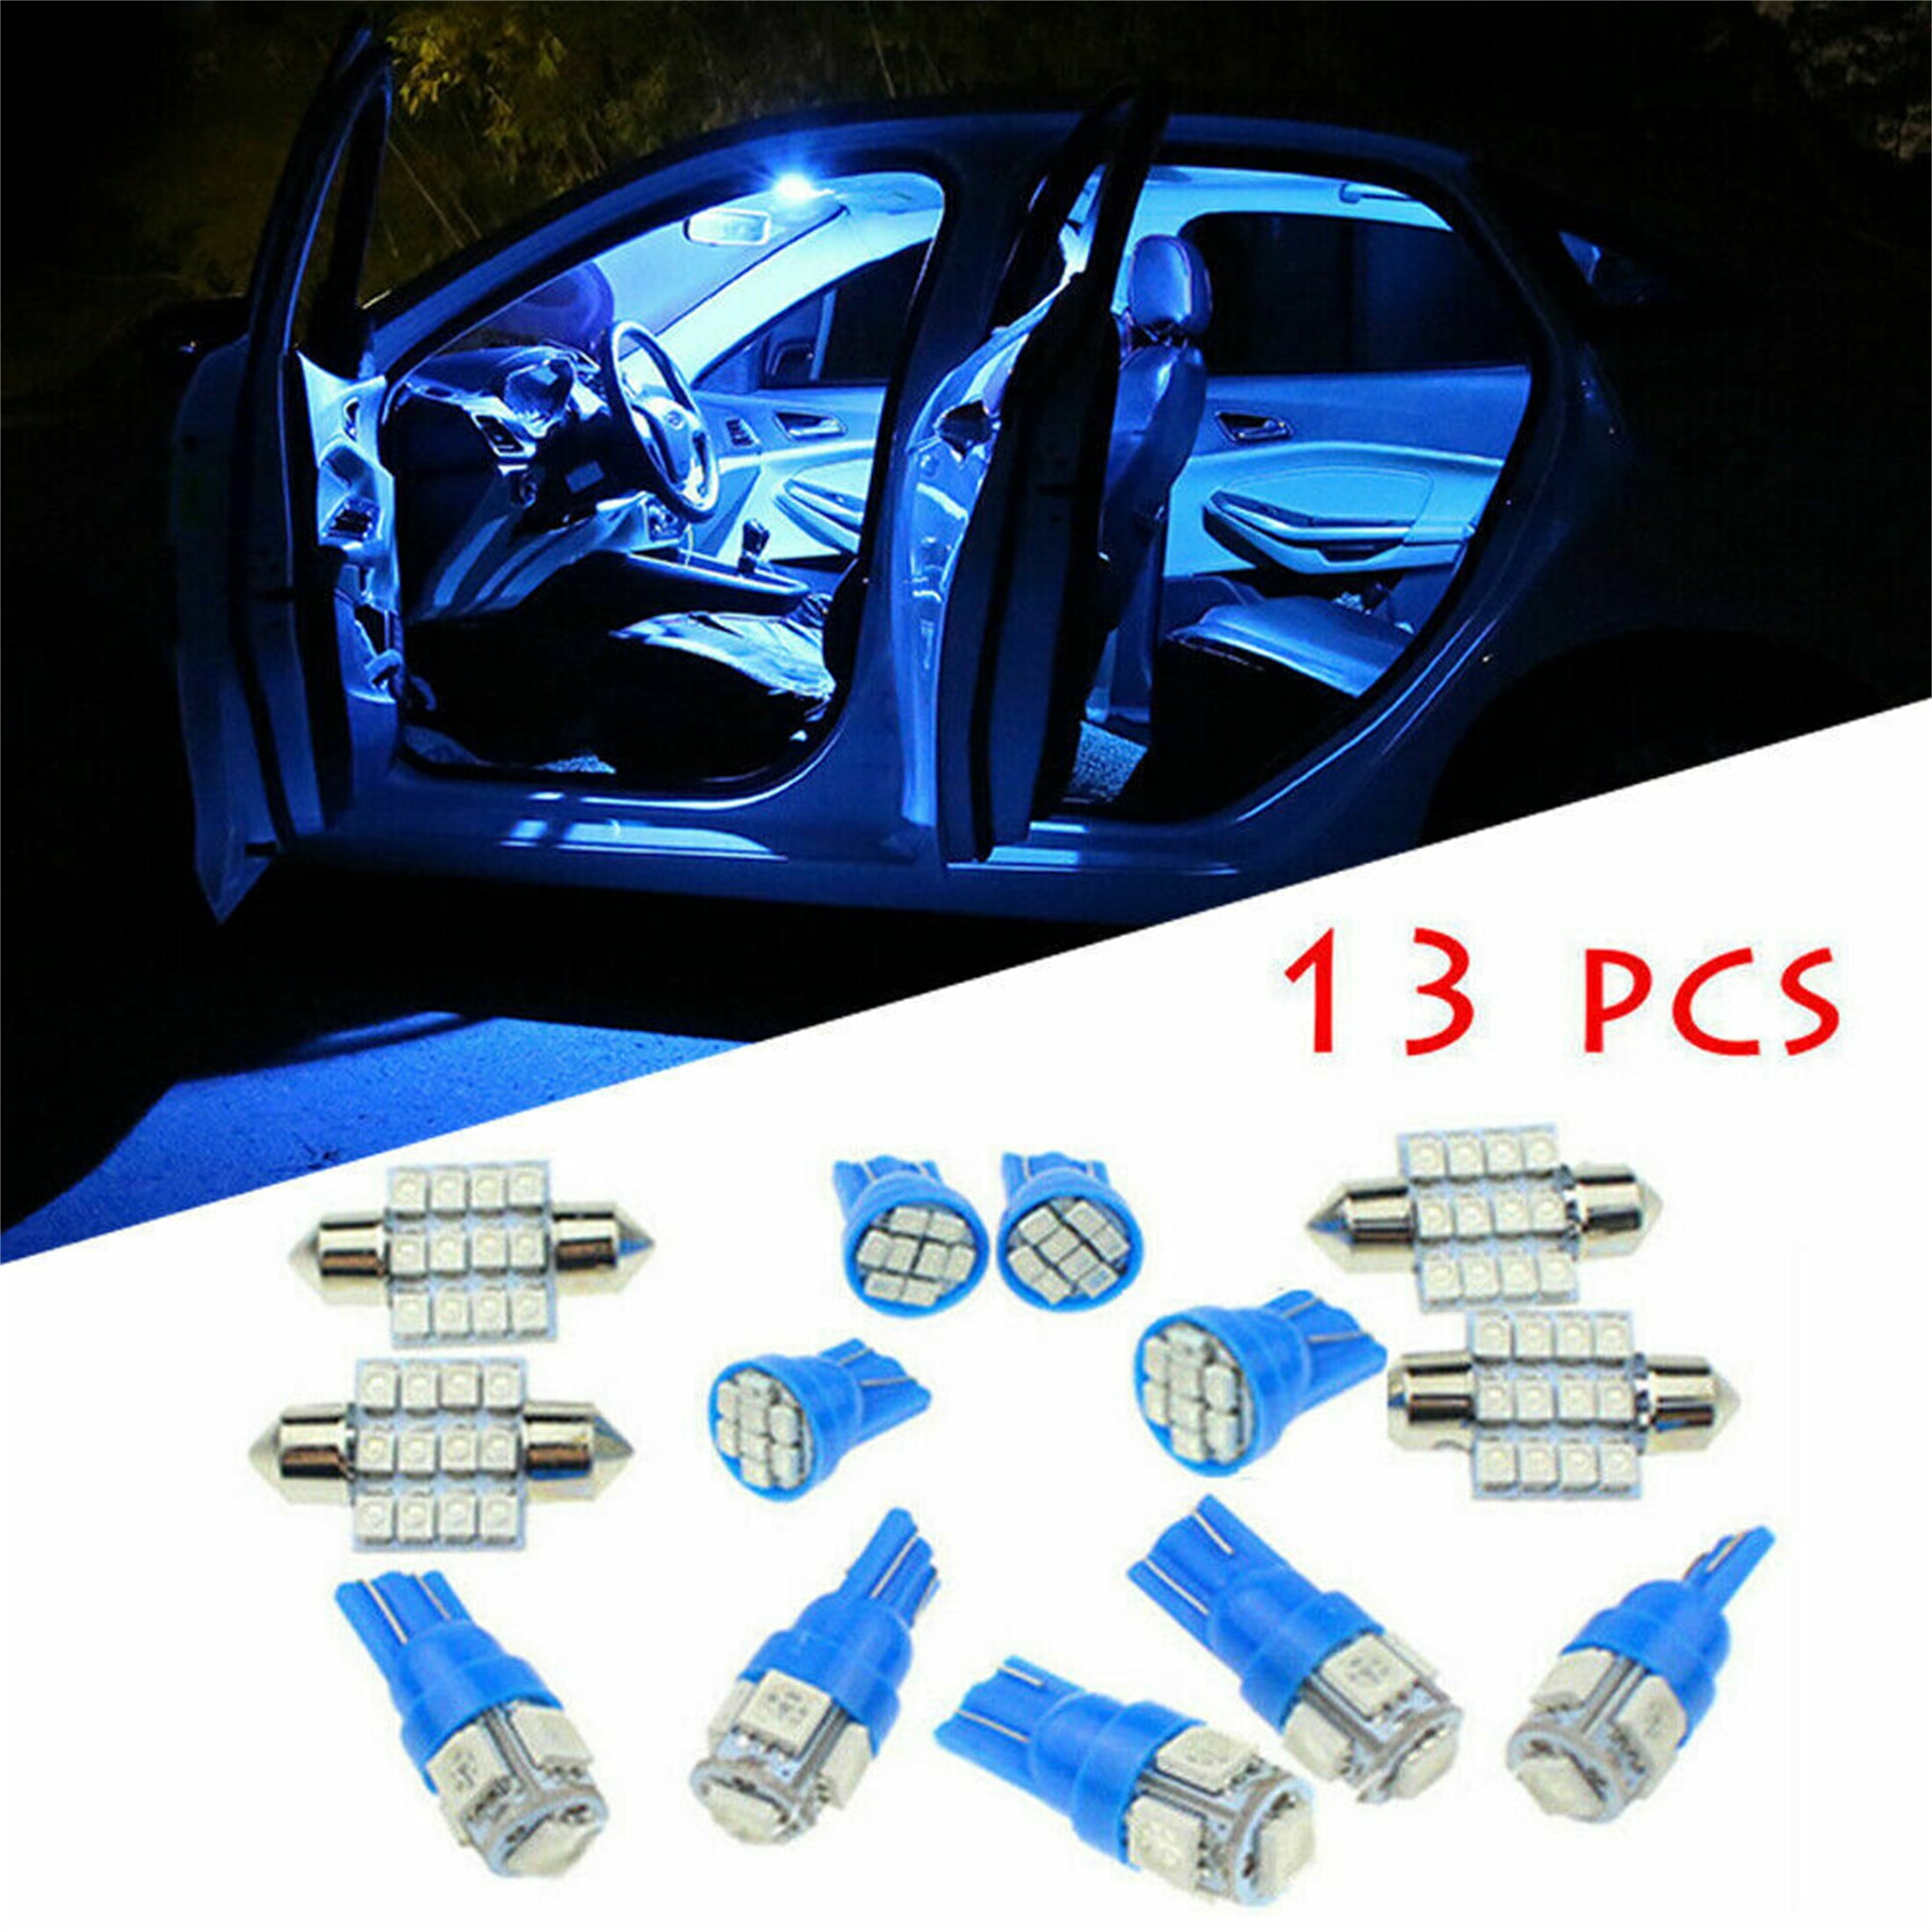 13X Car White LED Lights Kit for Stock Interior & Dome & License Plate Lamps US 